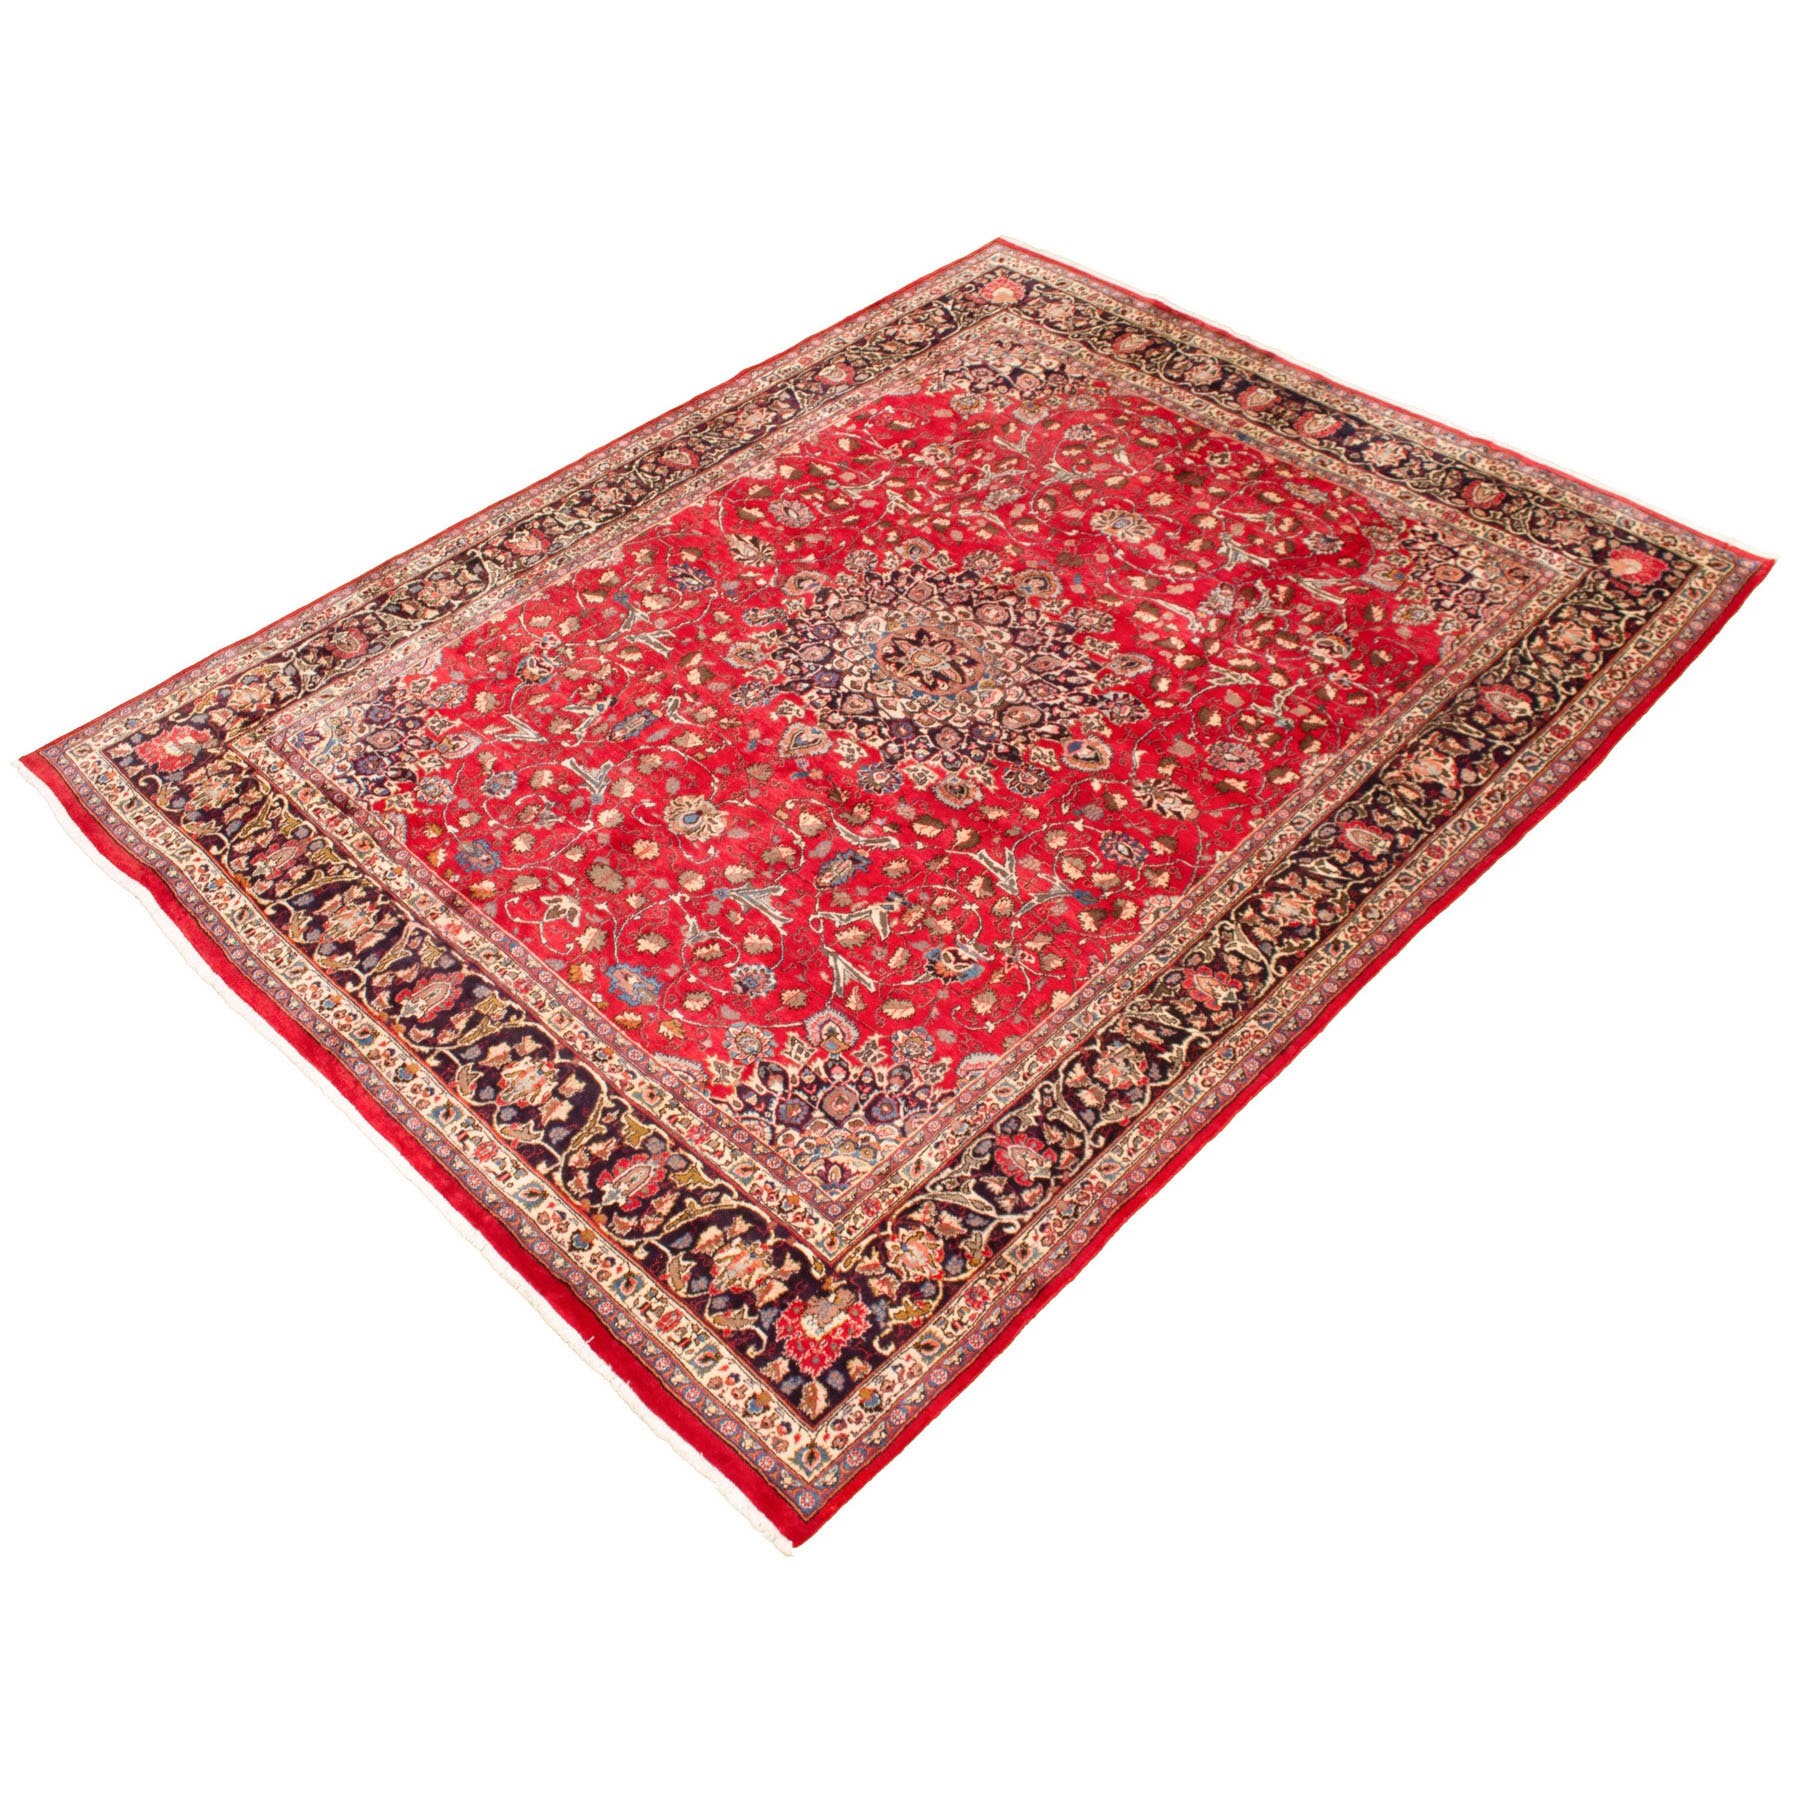 9-6 x12-3  Red Semi Antique Persian Kashan Pure Wool Hand Knotted Oriental Rug 